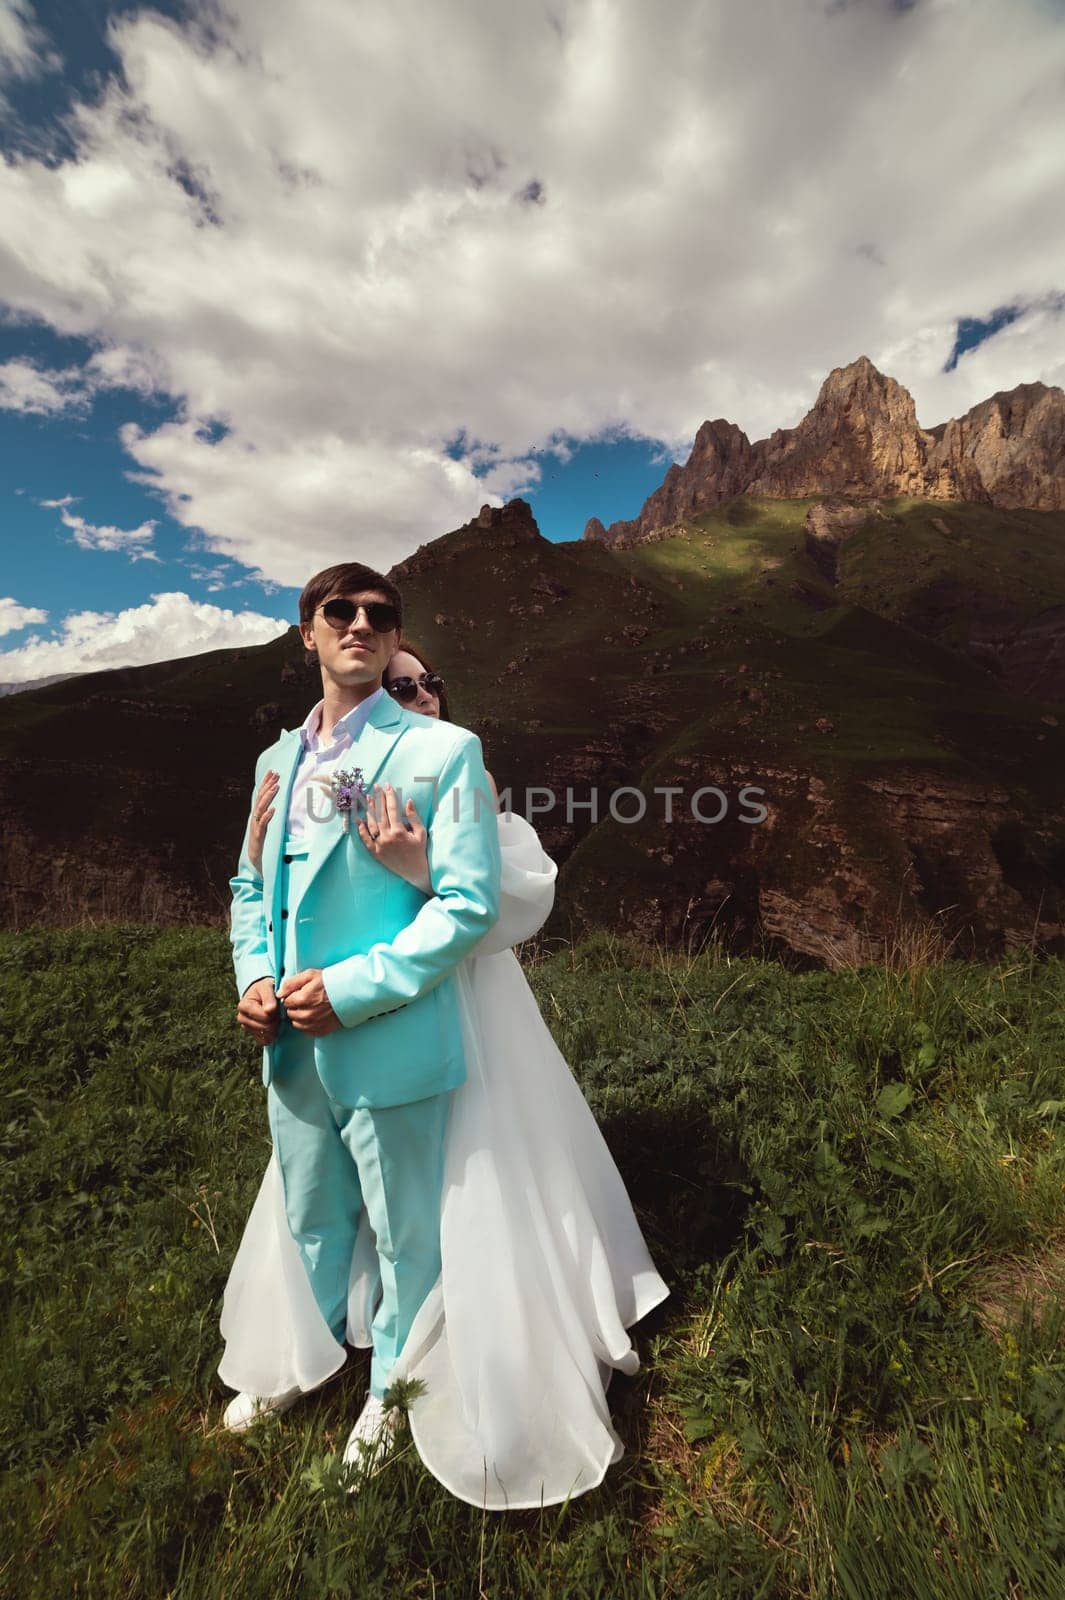 A young man and his wife stand in an embrace high in the mountains against the backdrop of epic rocks on a sunny day. Newlyweds wedding couple in the mountains by yanik88